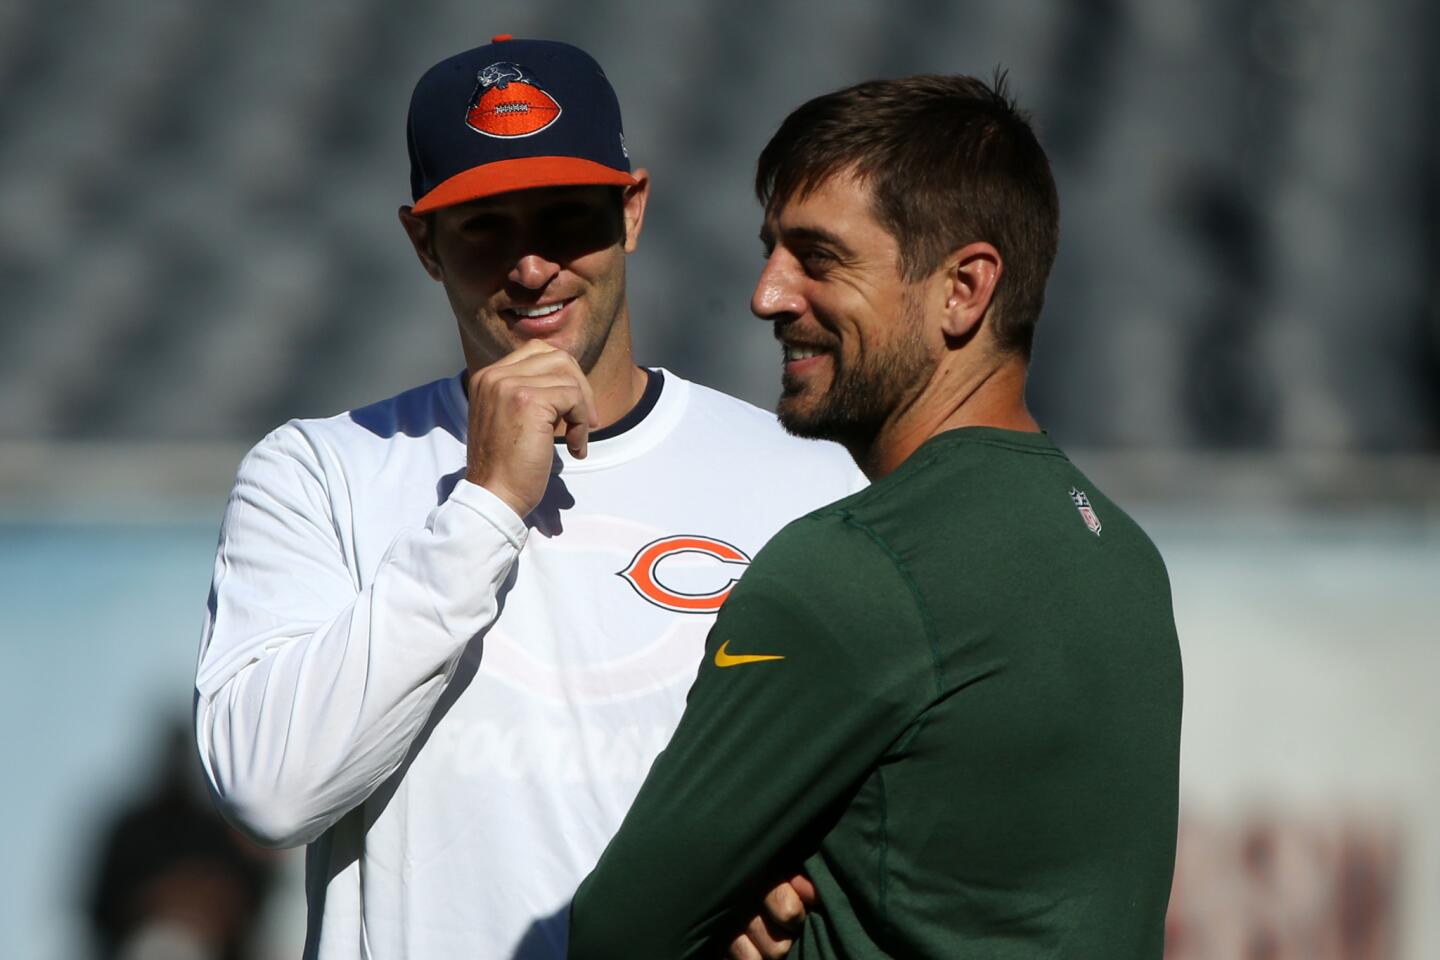 Packers quarterback Aaron Rodgers chats with Jay Cutler prior to their game.